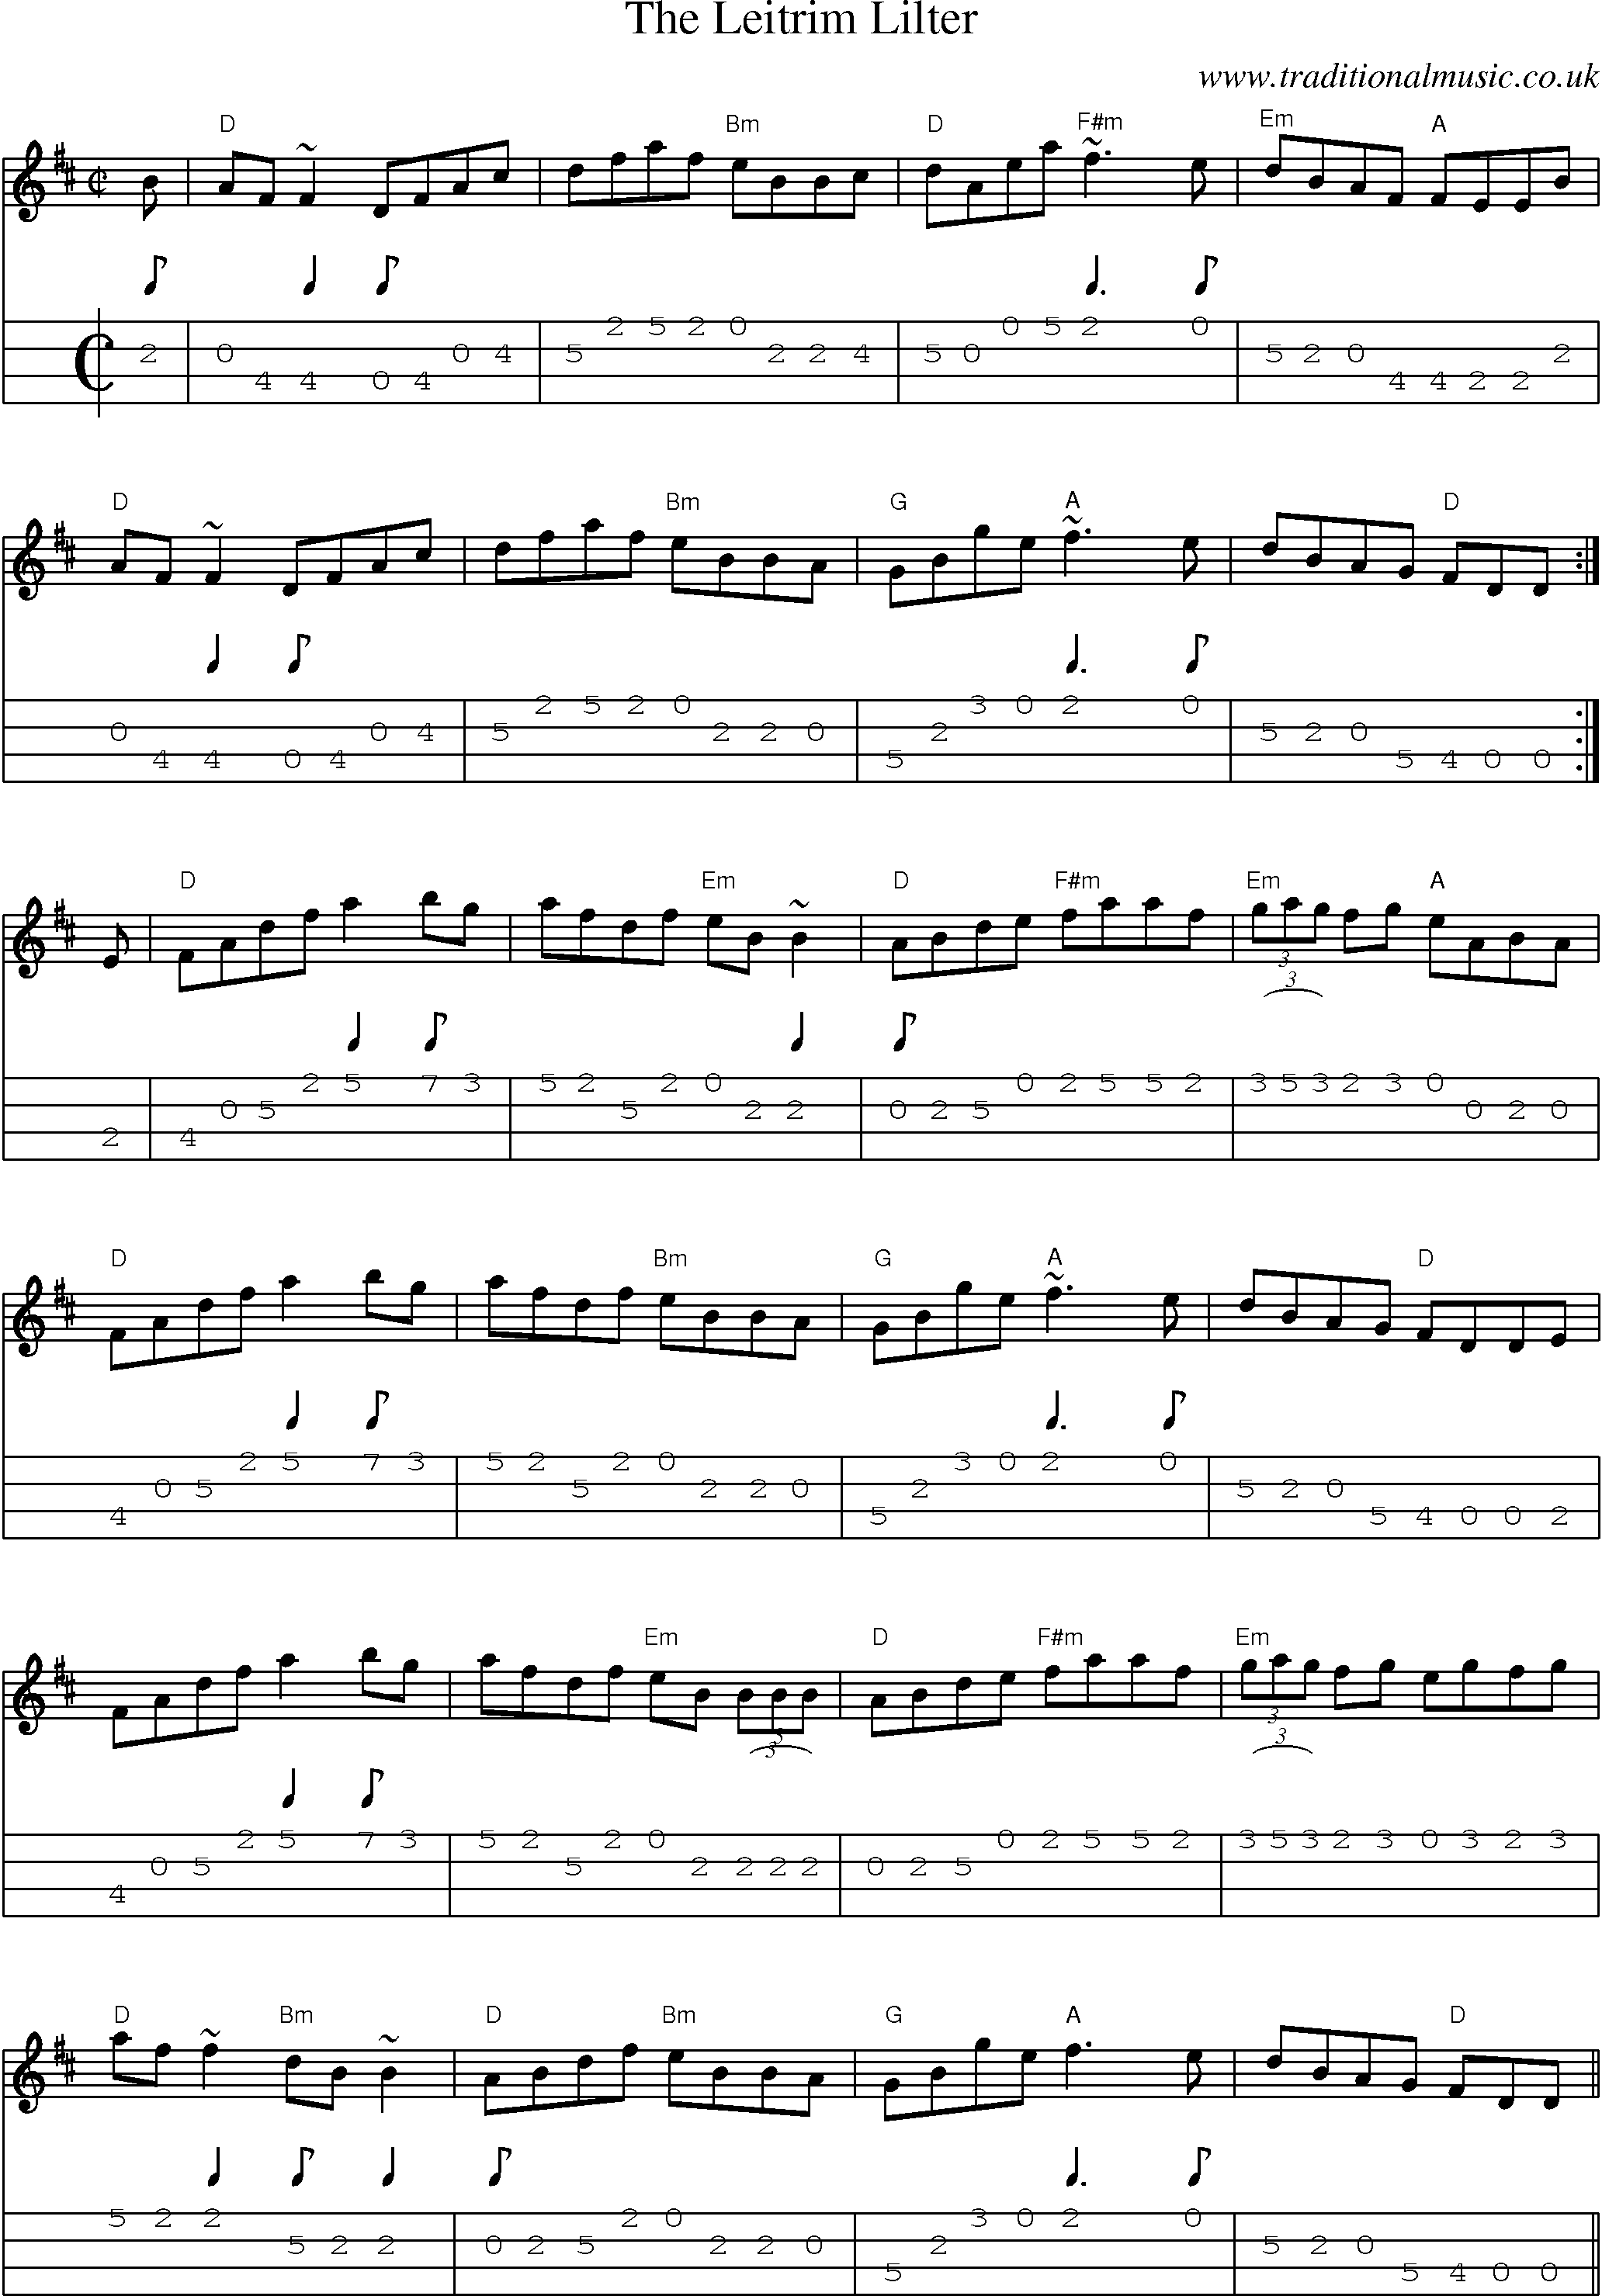 Music Score and Mandolin Tabs for The Leitrim Lilter